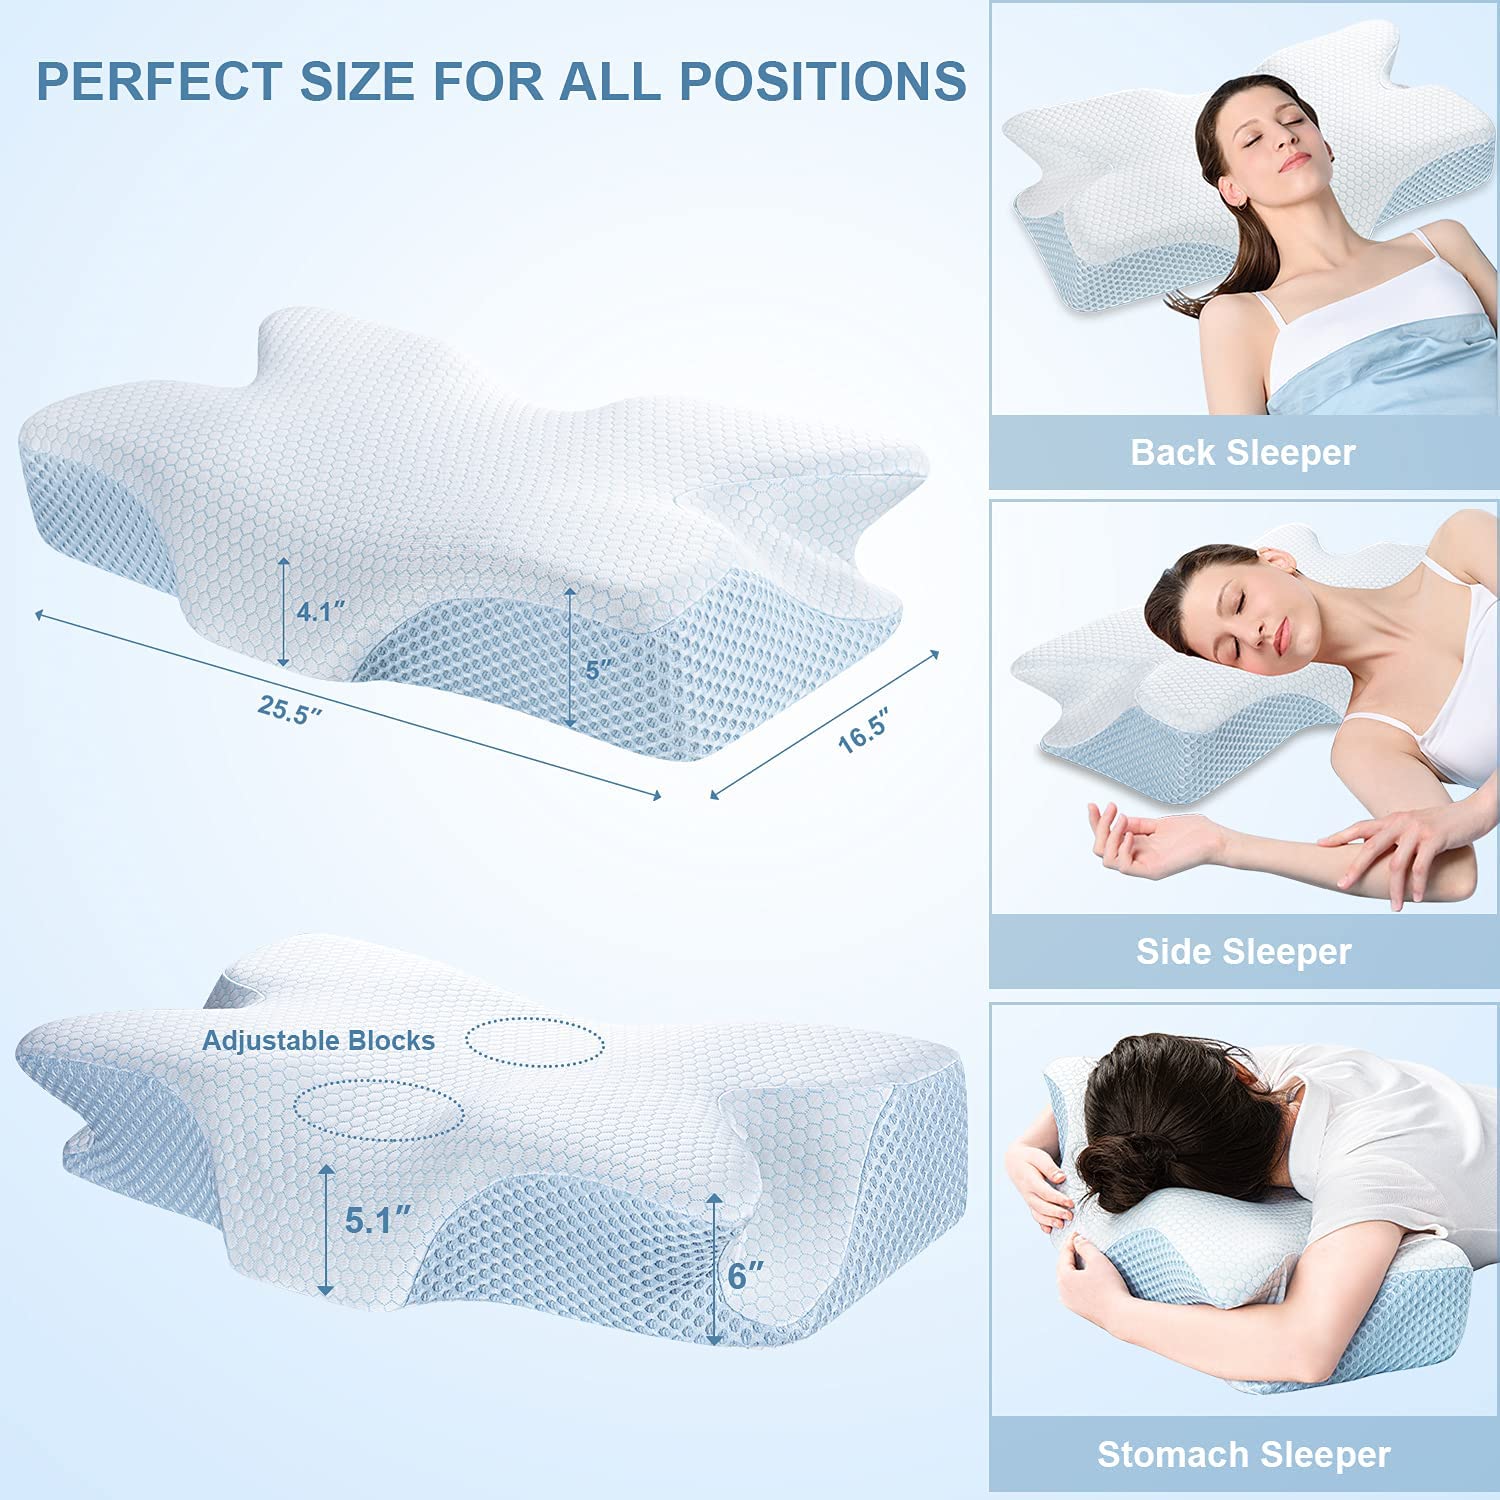 Cervical Memory Foam Pillow, Contoured Pillows for Neck and Shoulder Pain,  Ergonomic Orthopedic Sleeping Neck Contoured Support Pillow for Side  Sleepers, Back and Stomach Sleepers 